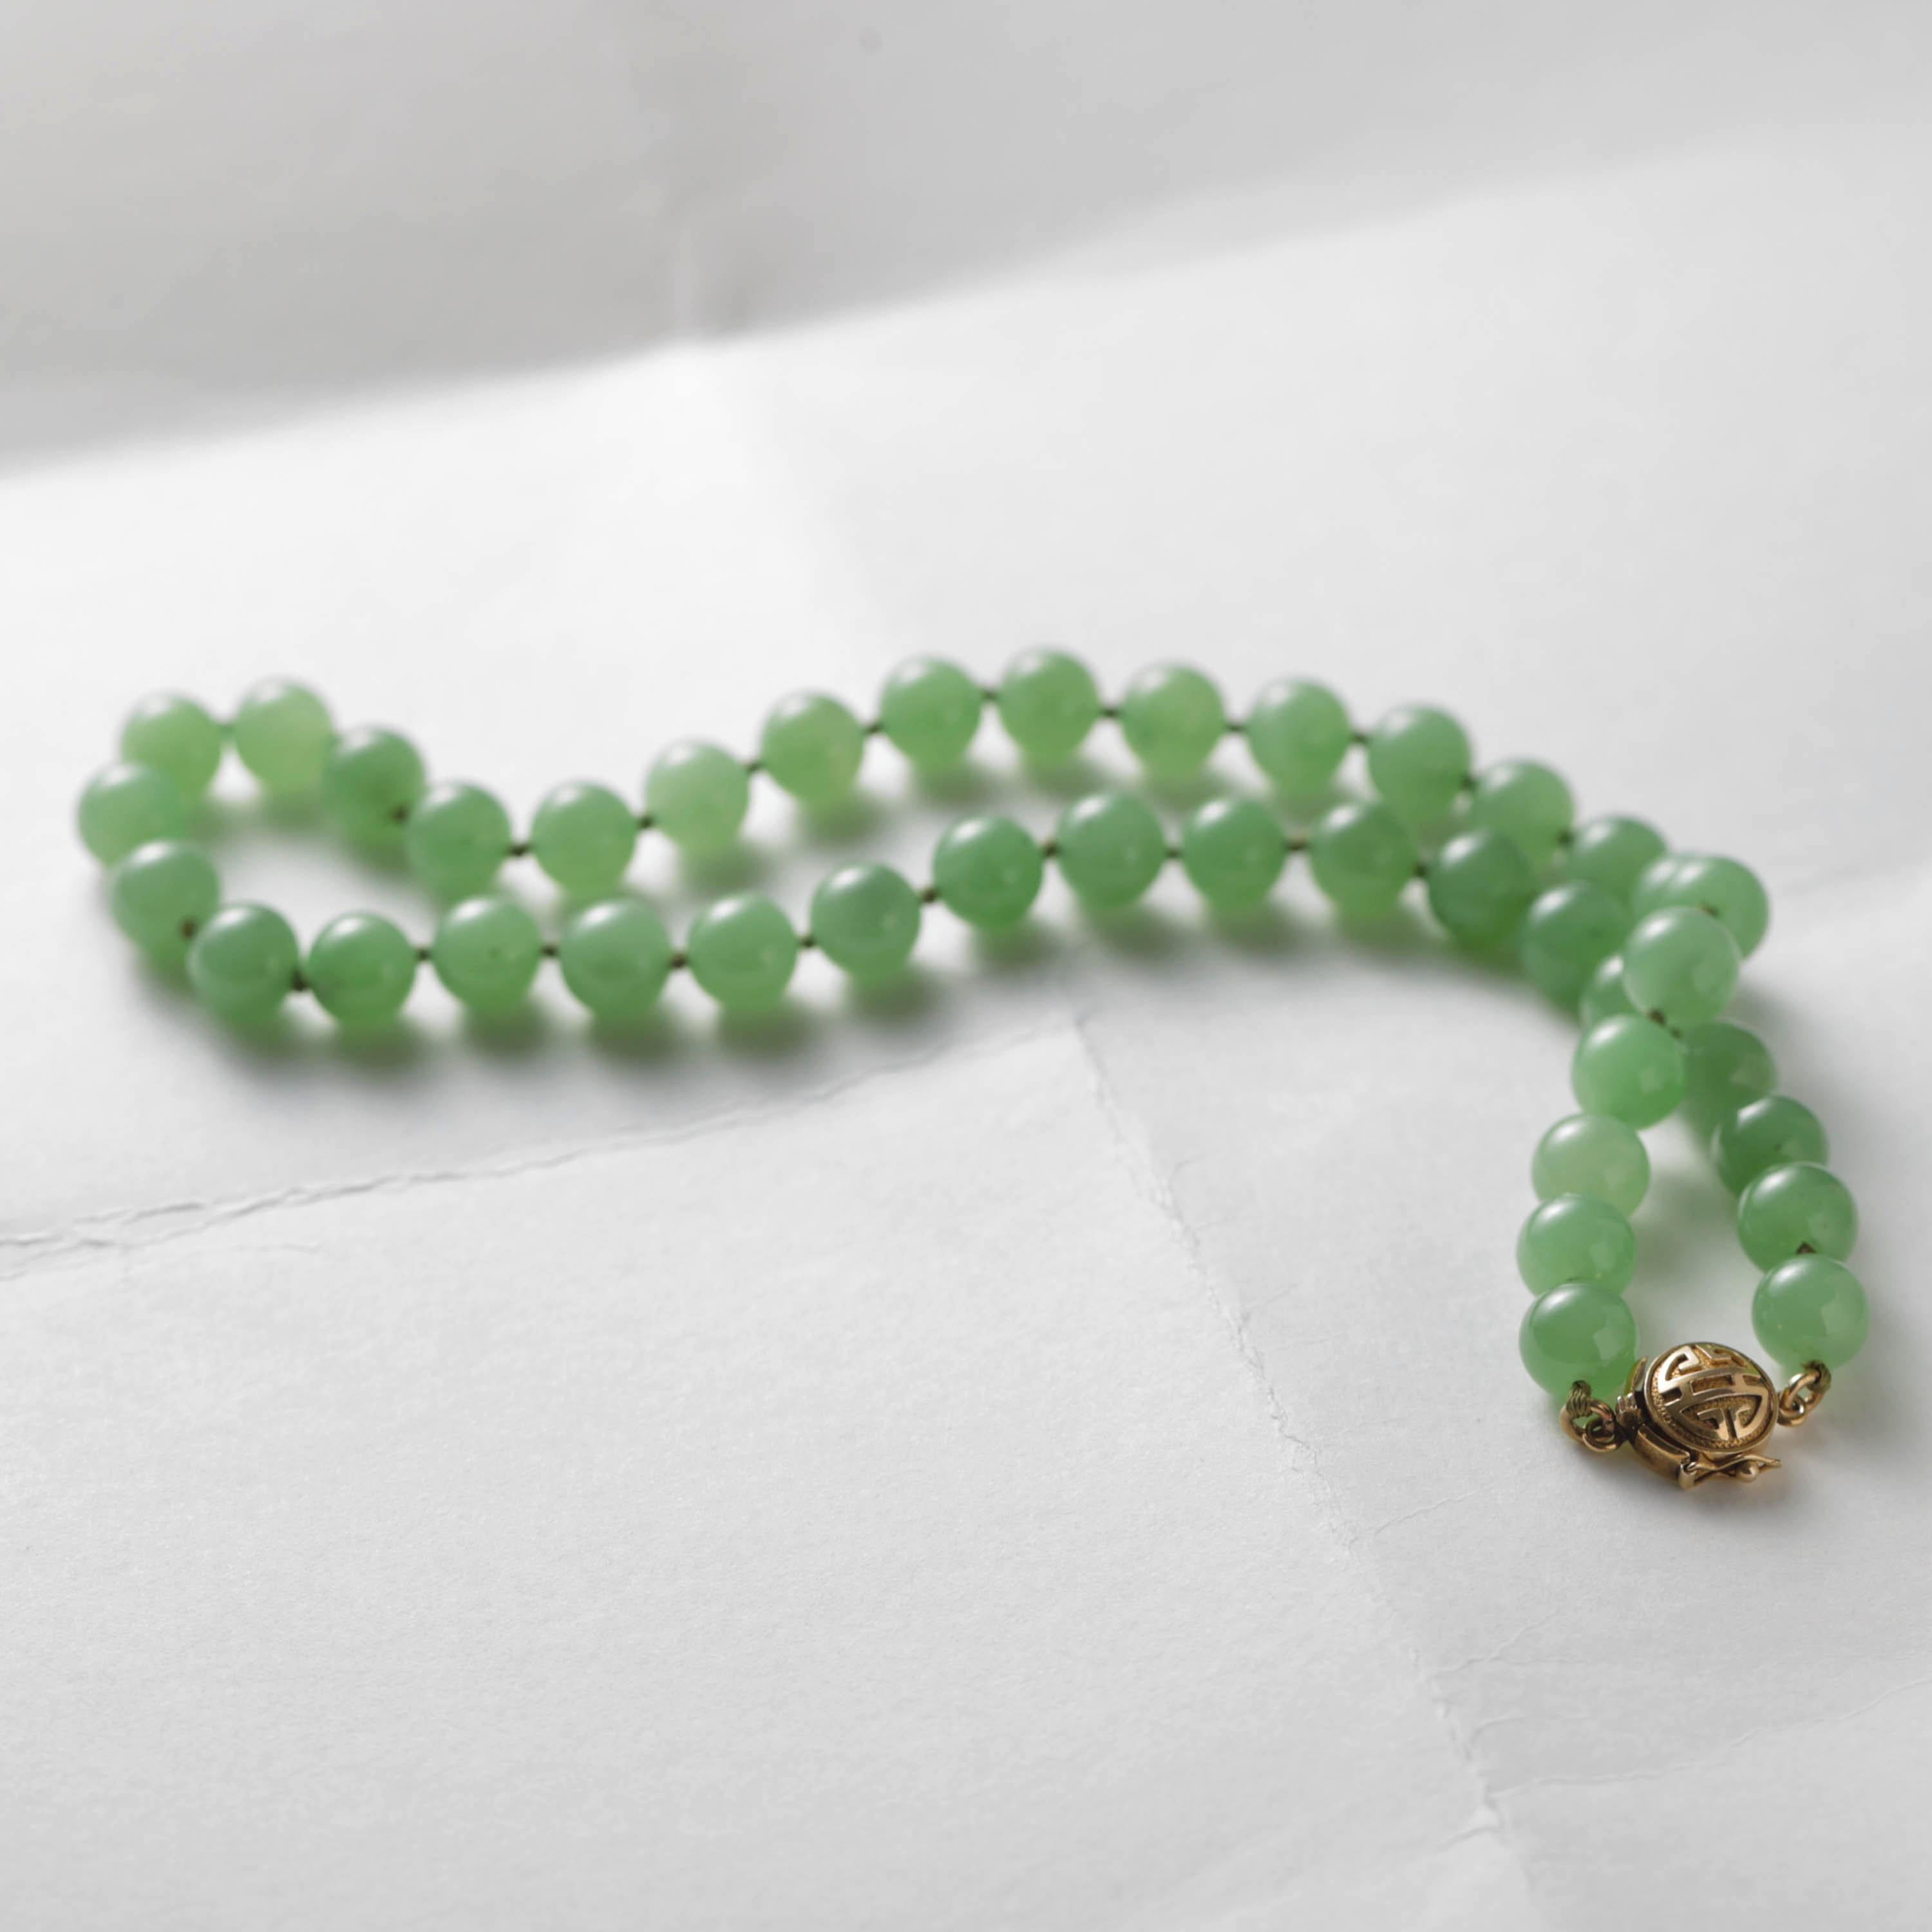 Women's or Men's Rare Gump's Jade Necklace, Impossibly Translucent Nephrite 16 ¾